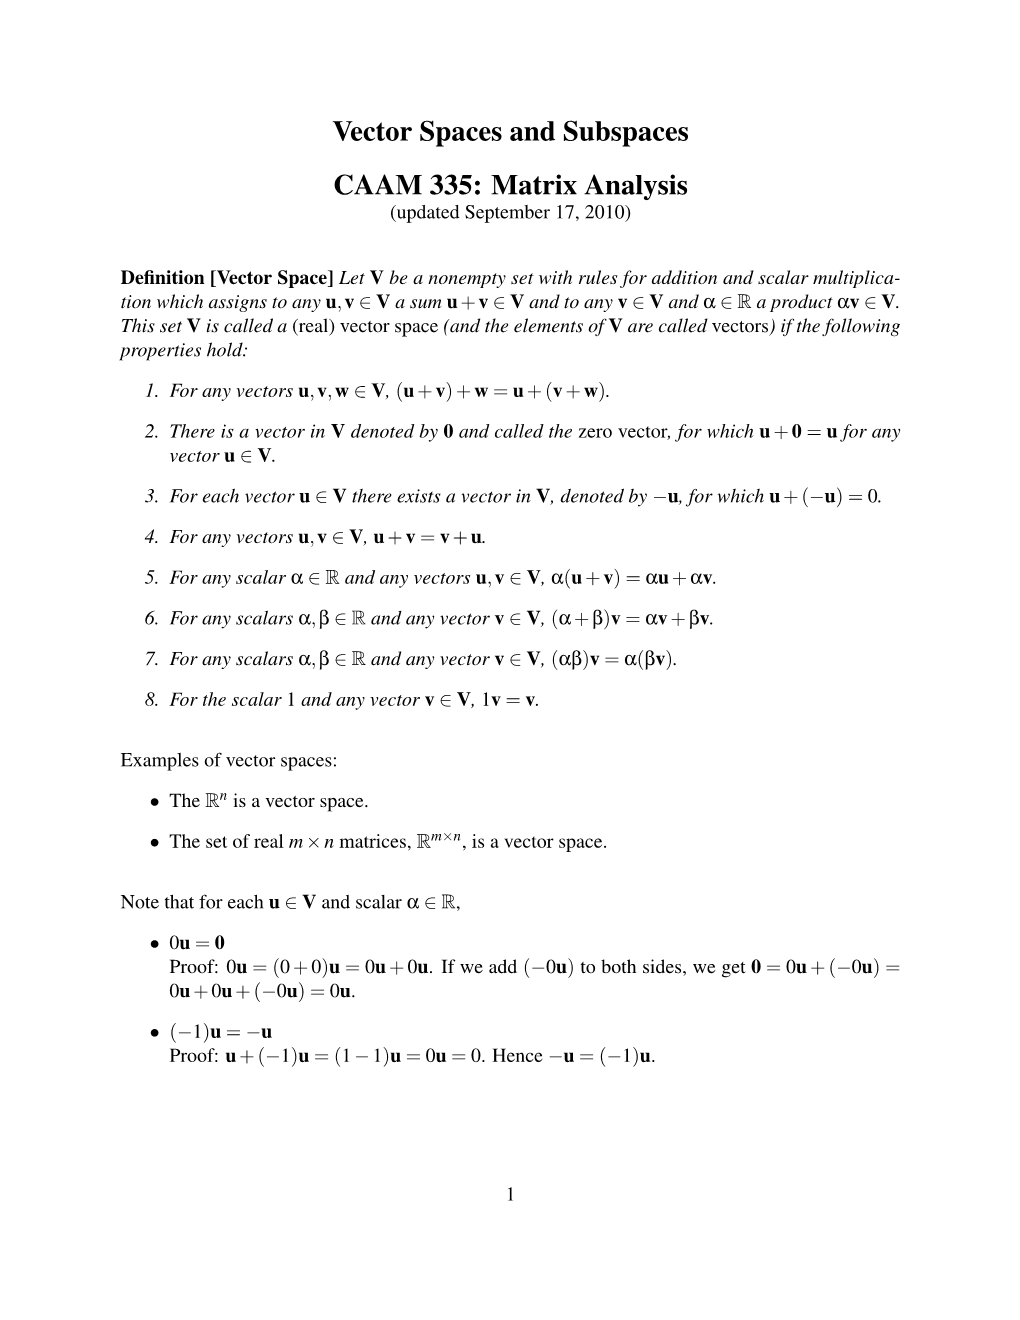 Vector Spaces and Subspaces CAAM 335: Matrix Analysis (Updated September 17, 2010)